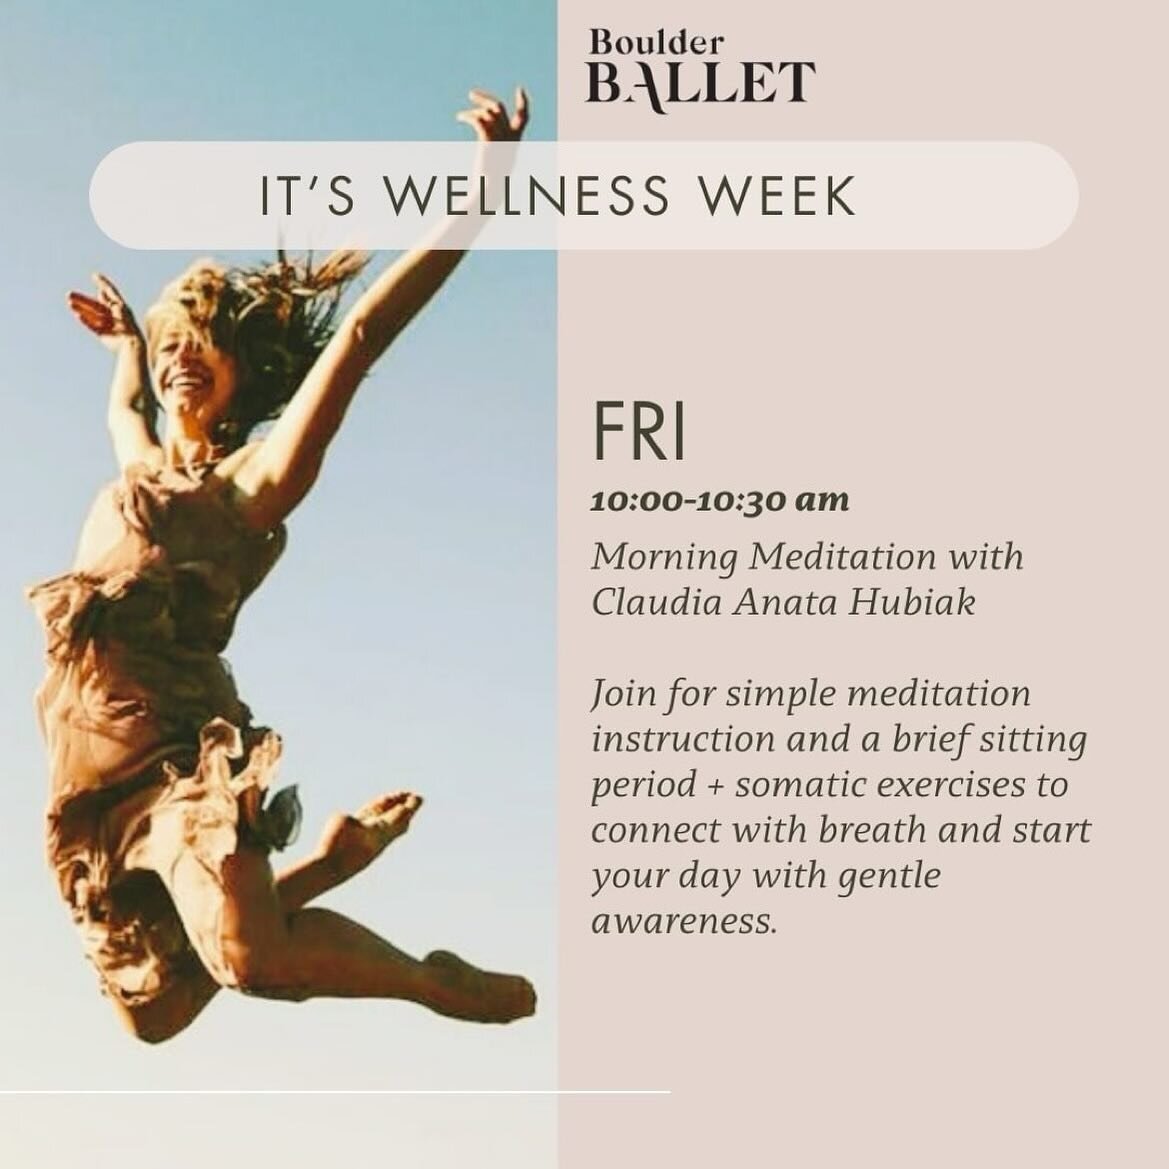 Looking forward to some meditation time with you all tomorrow for Wellness Week @boulder_ballet.